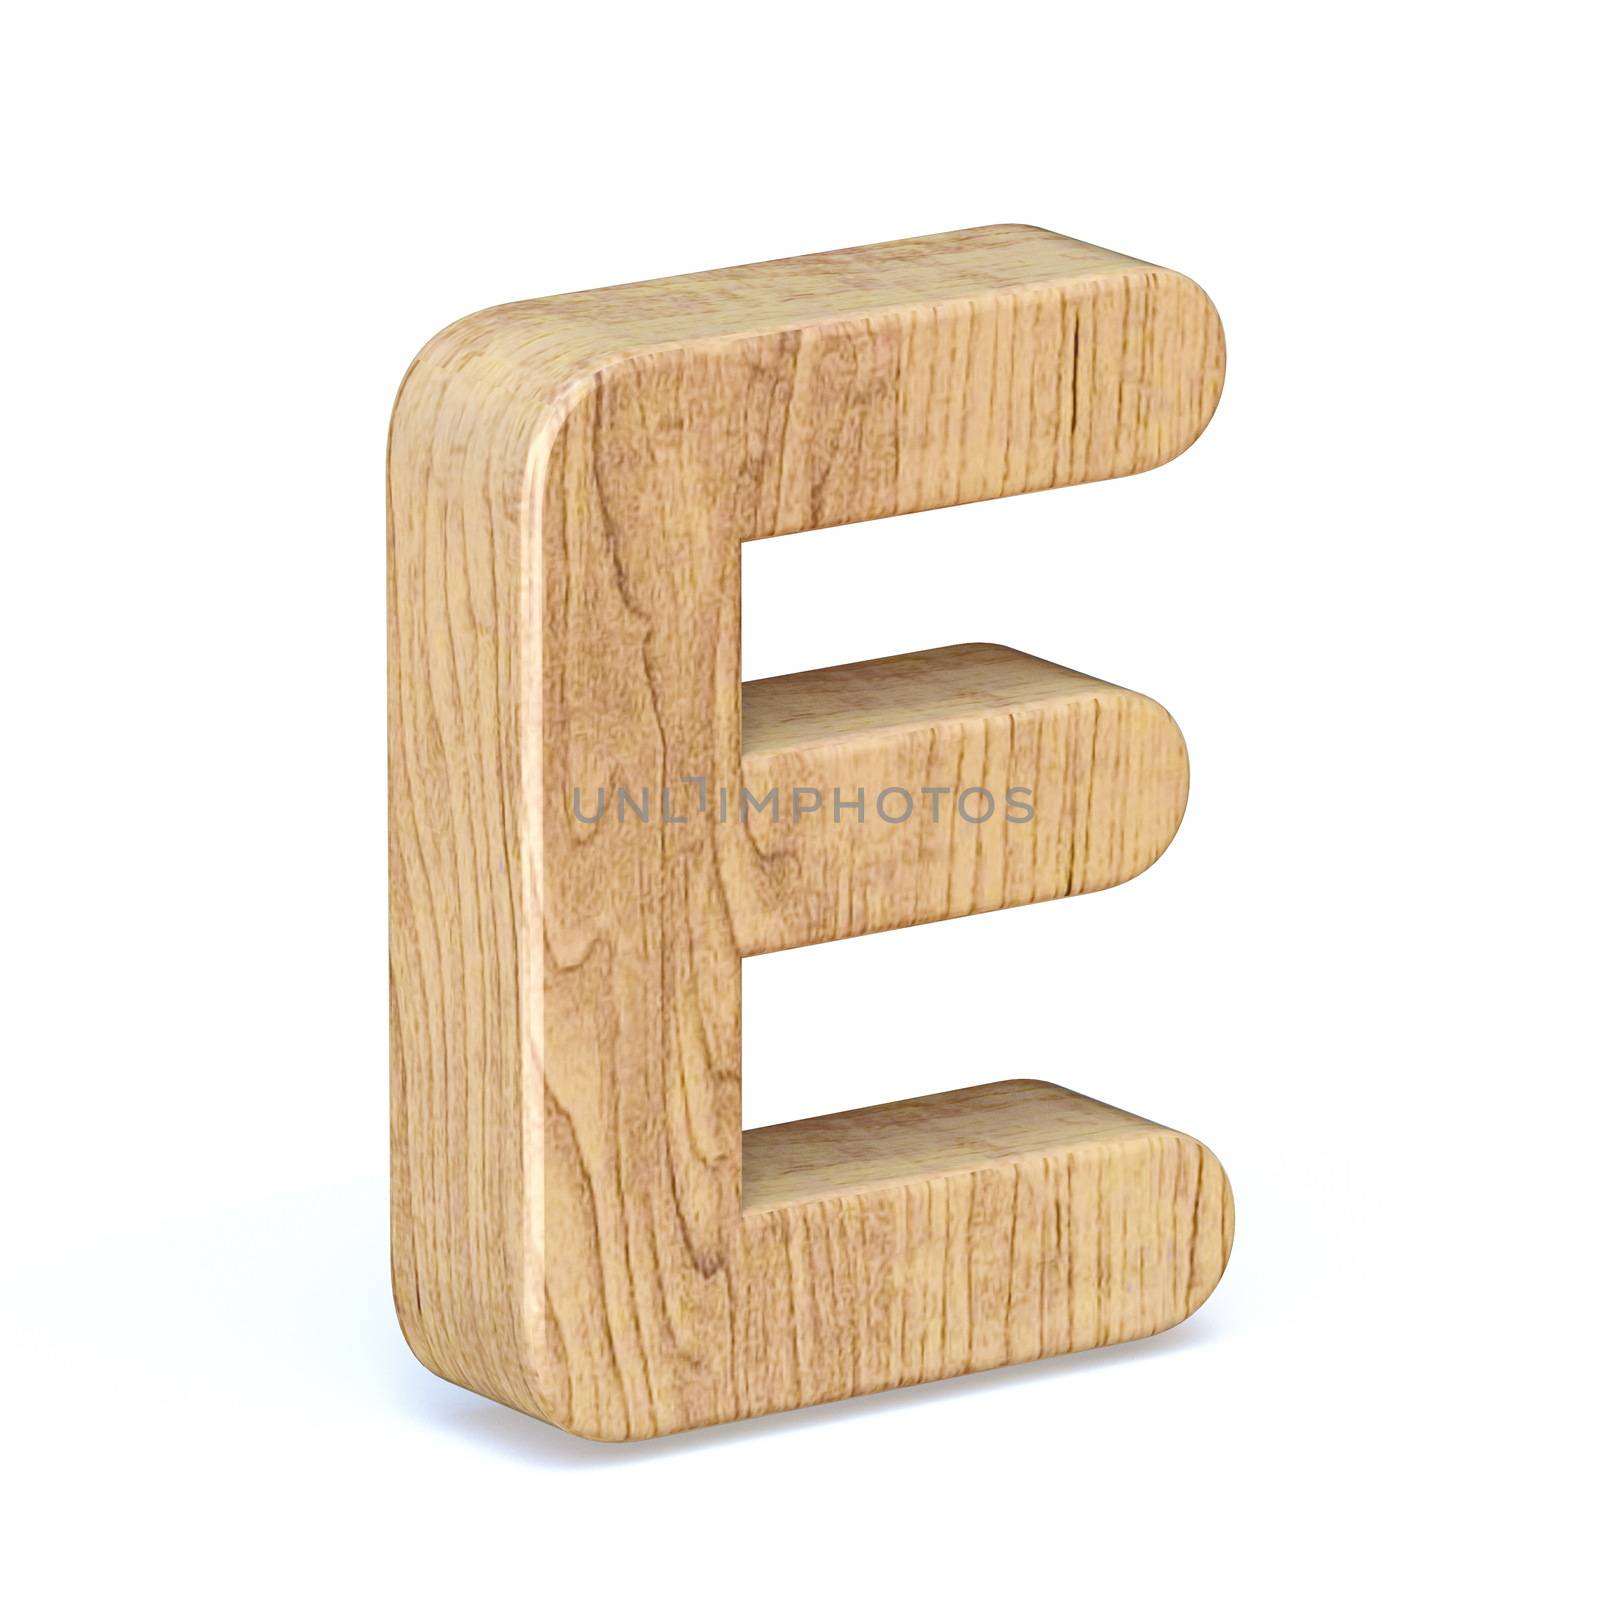 Rounded wooden font Letter E 3D by djmilic